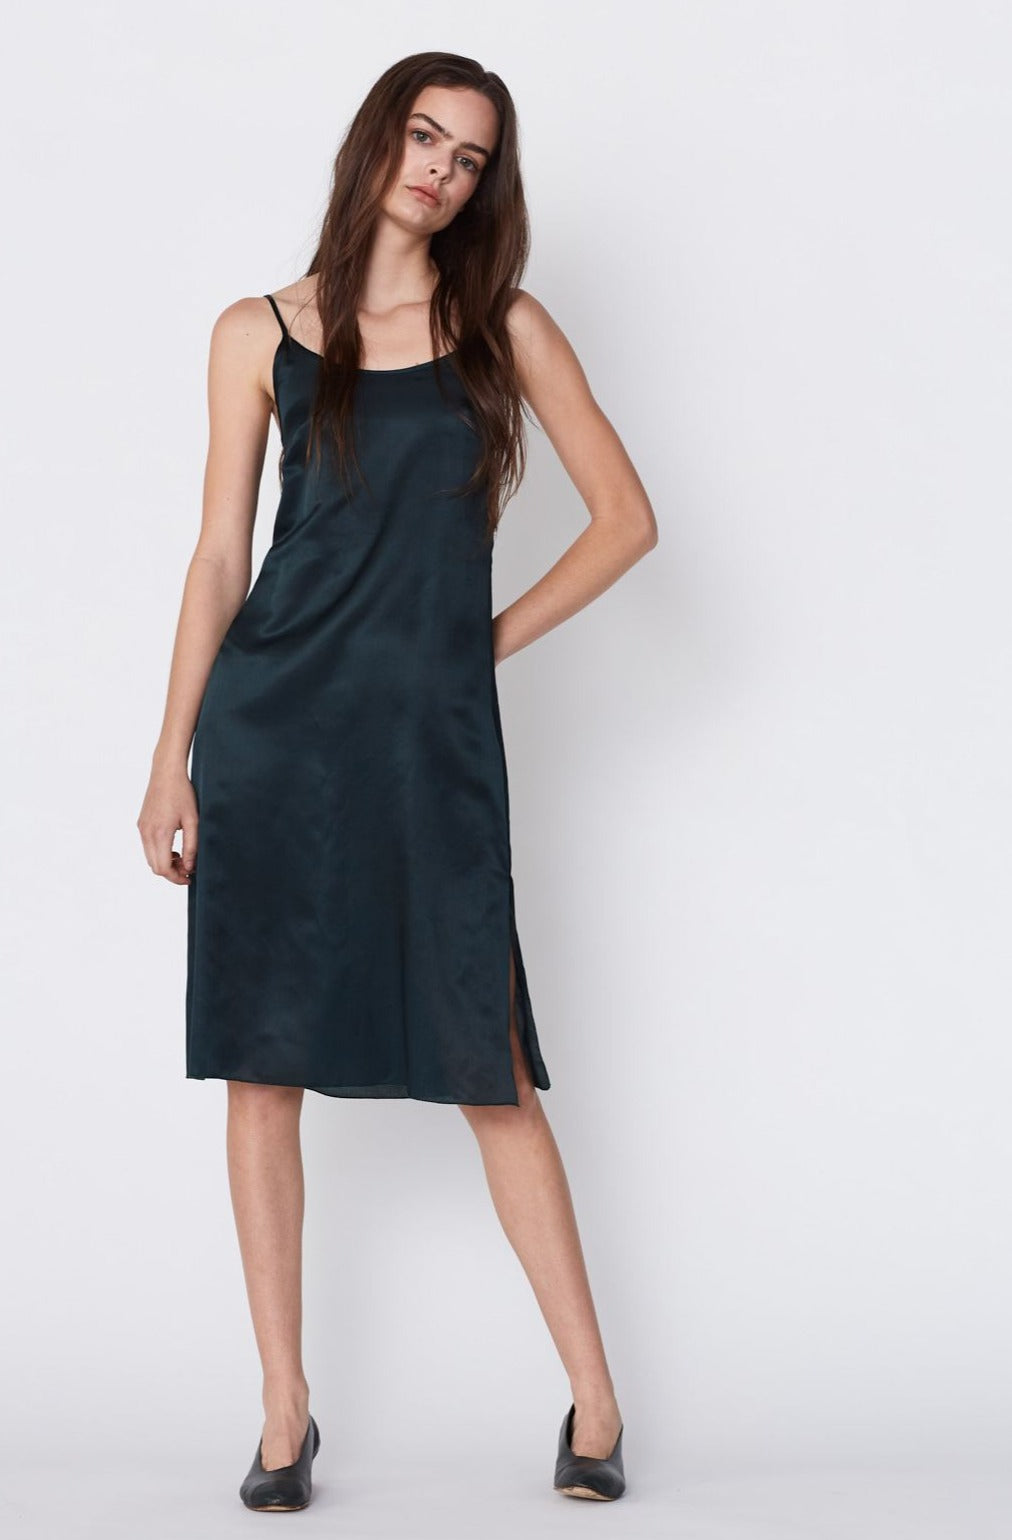 CBK Slip Dress in Ink Green Silk Twill. Made in Atlanta, ethically and sustainably, by slow fashion designer Megan Huntz.